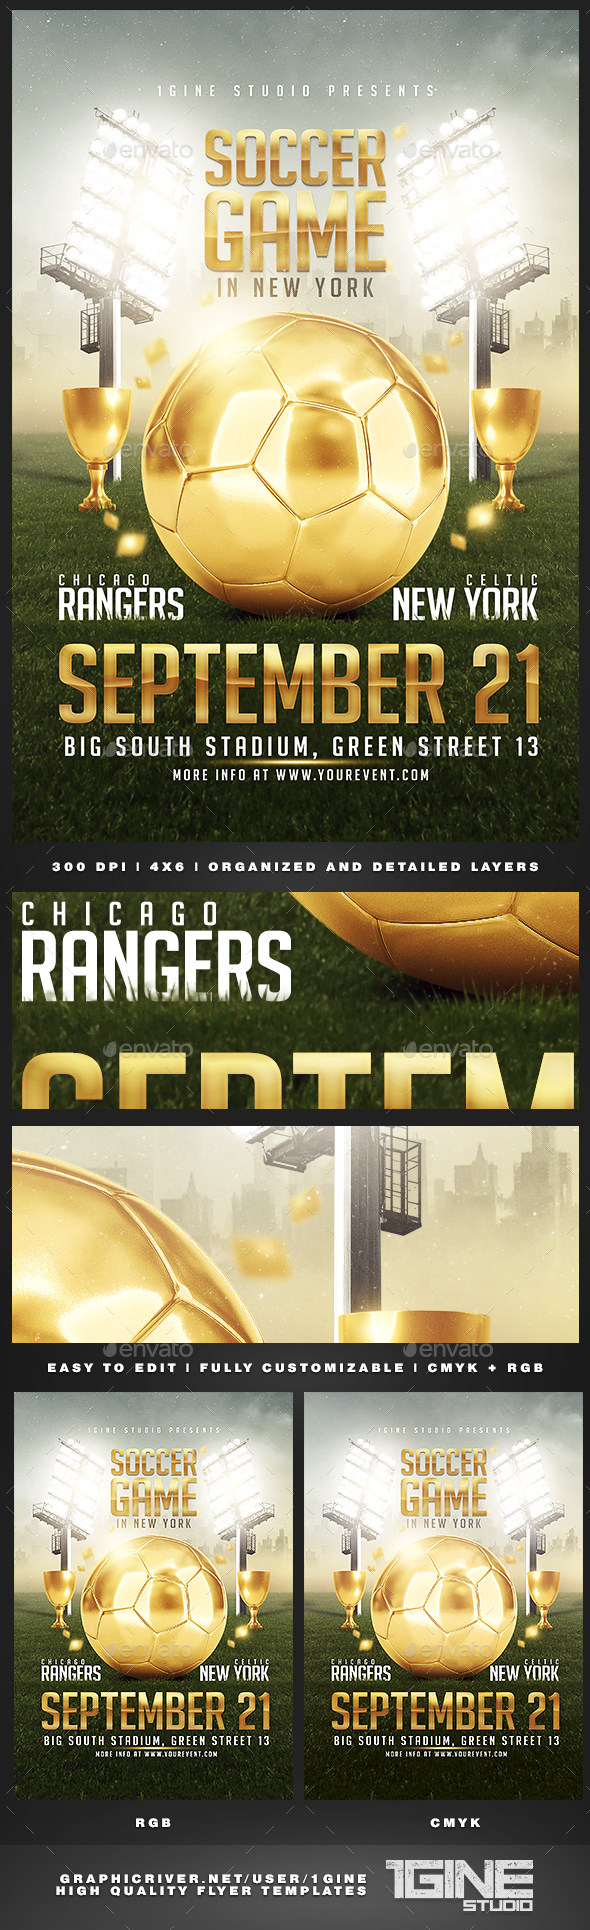 Soccer Game Flyer Template